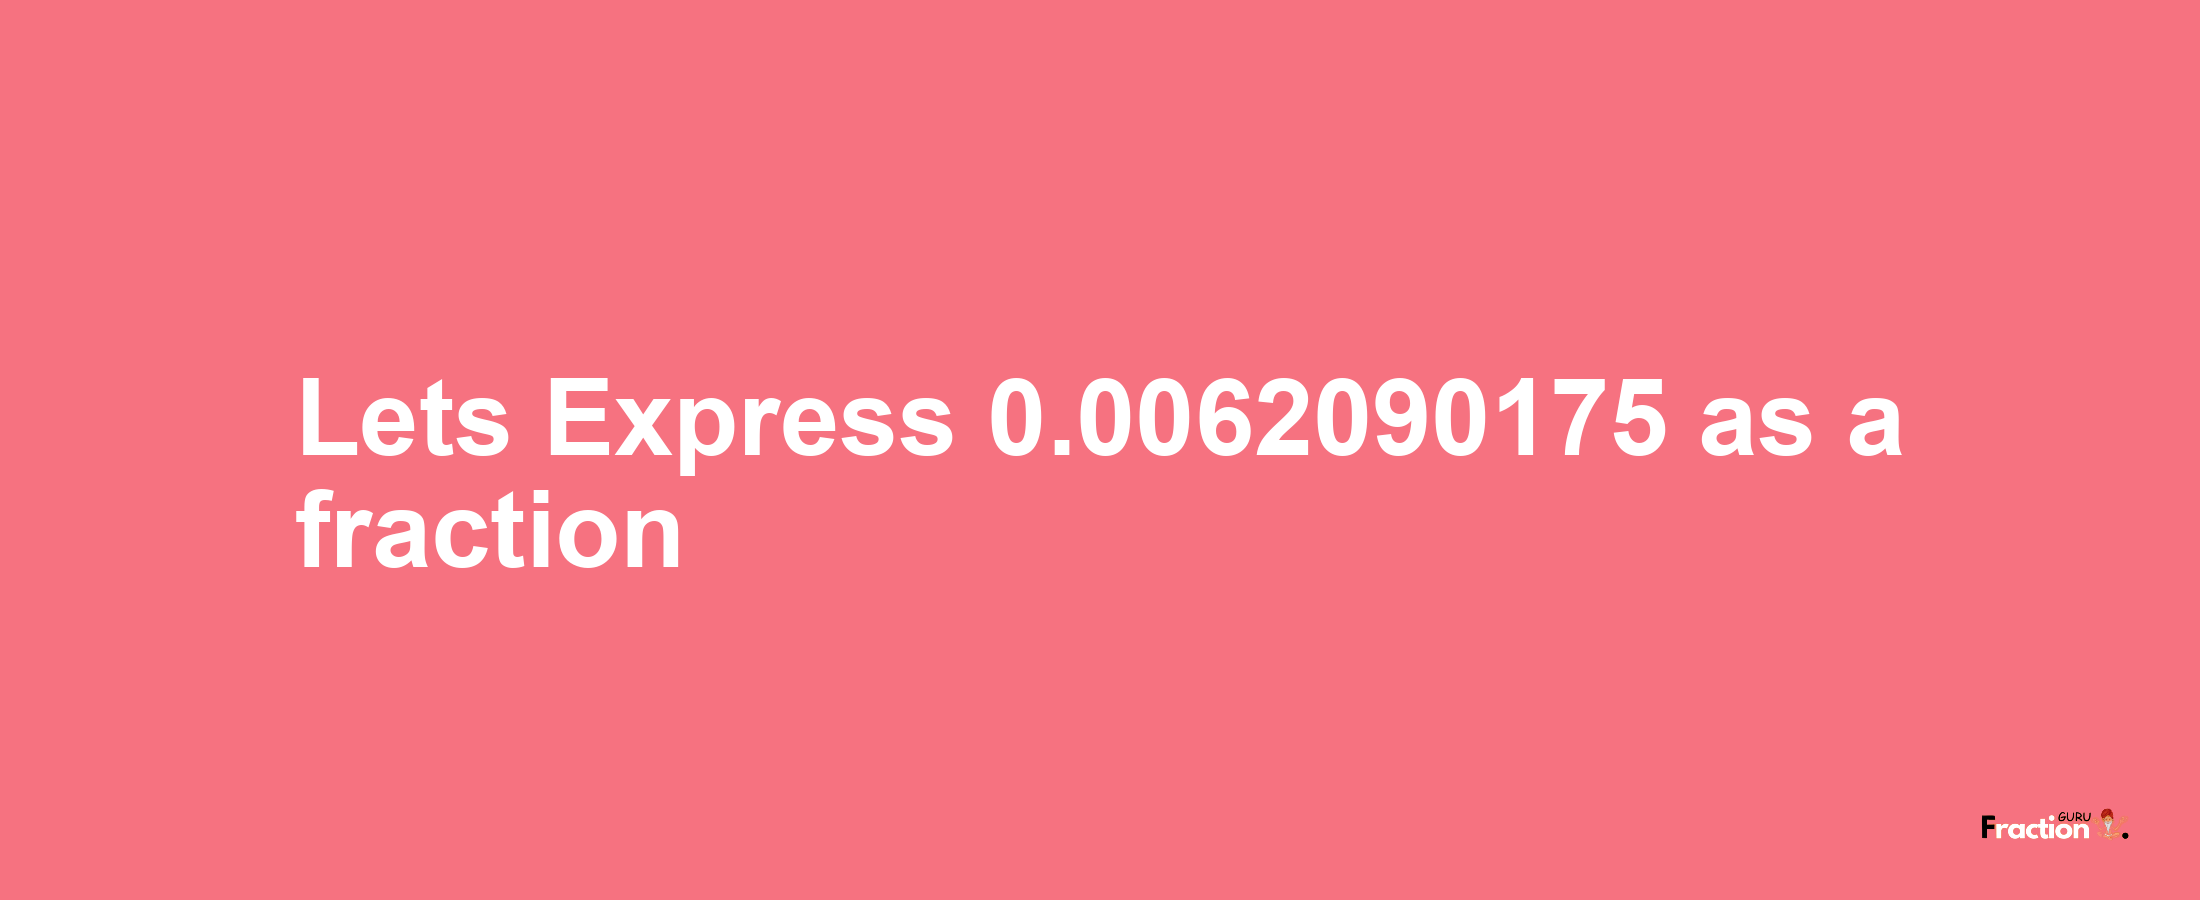 Lets Express 0.0062090175 as afraction